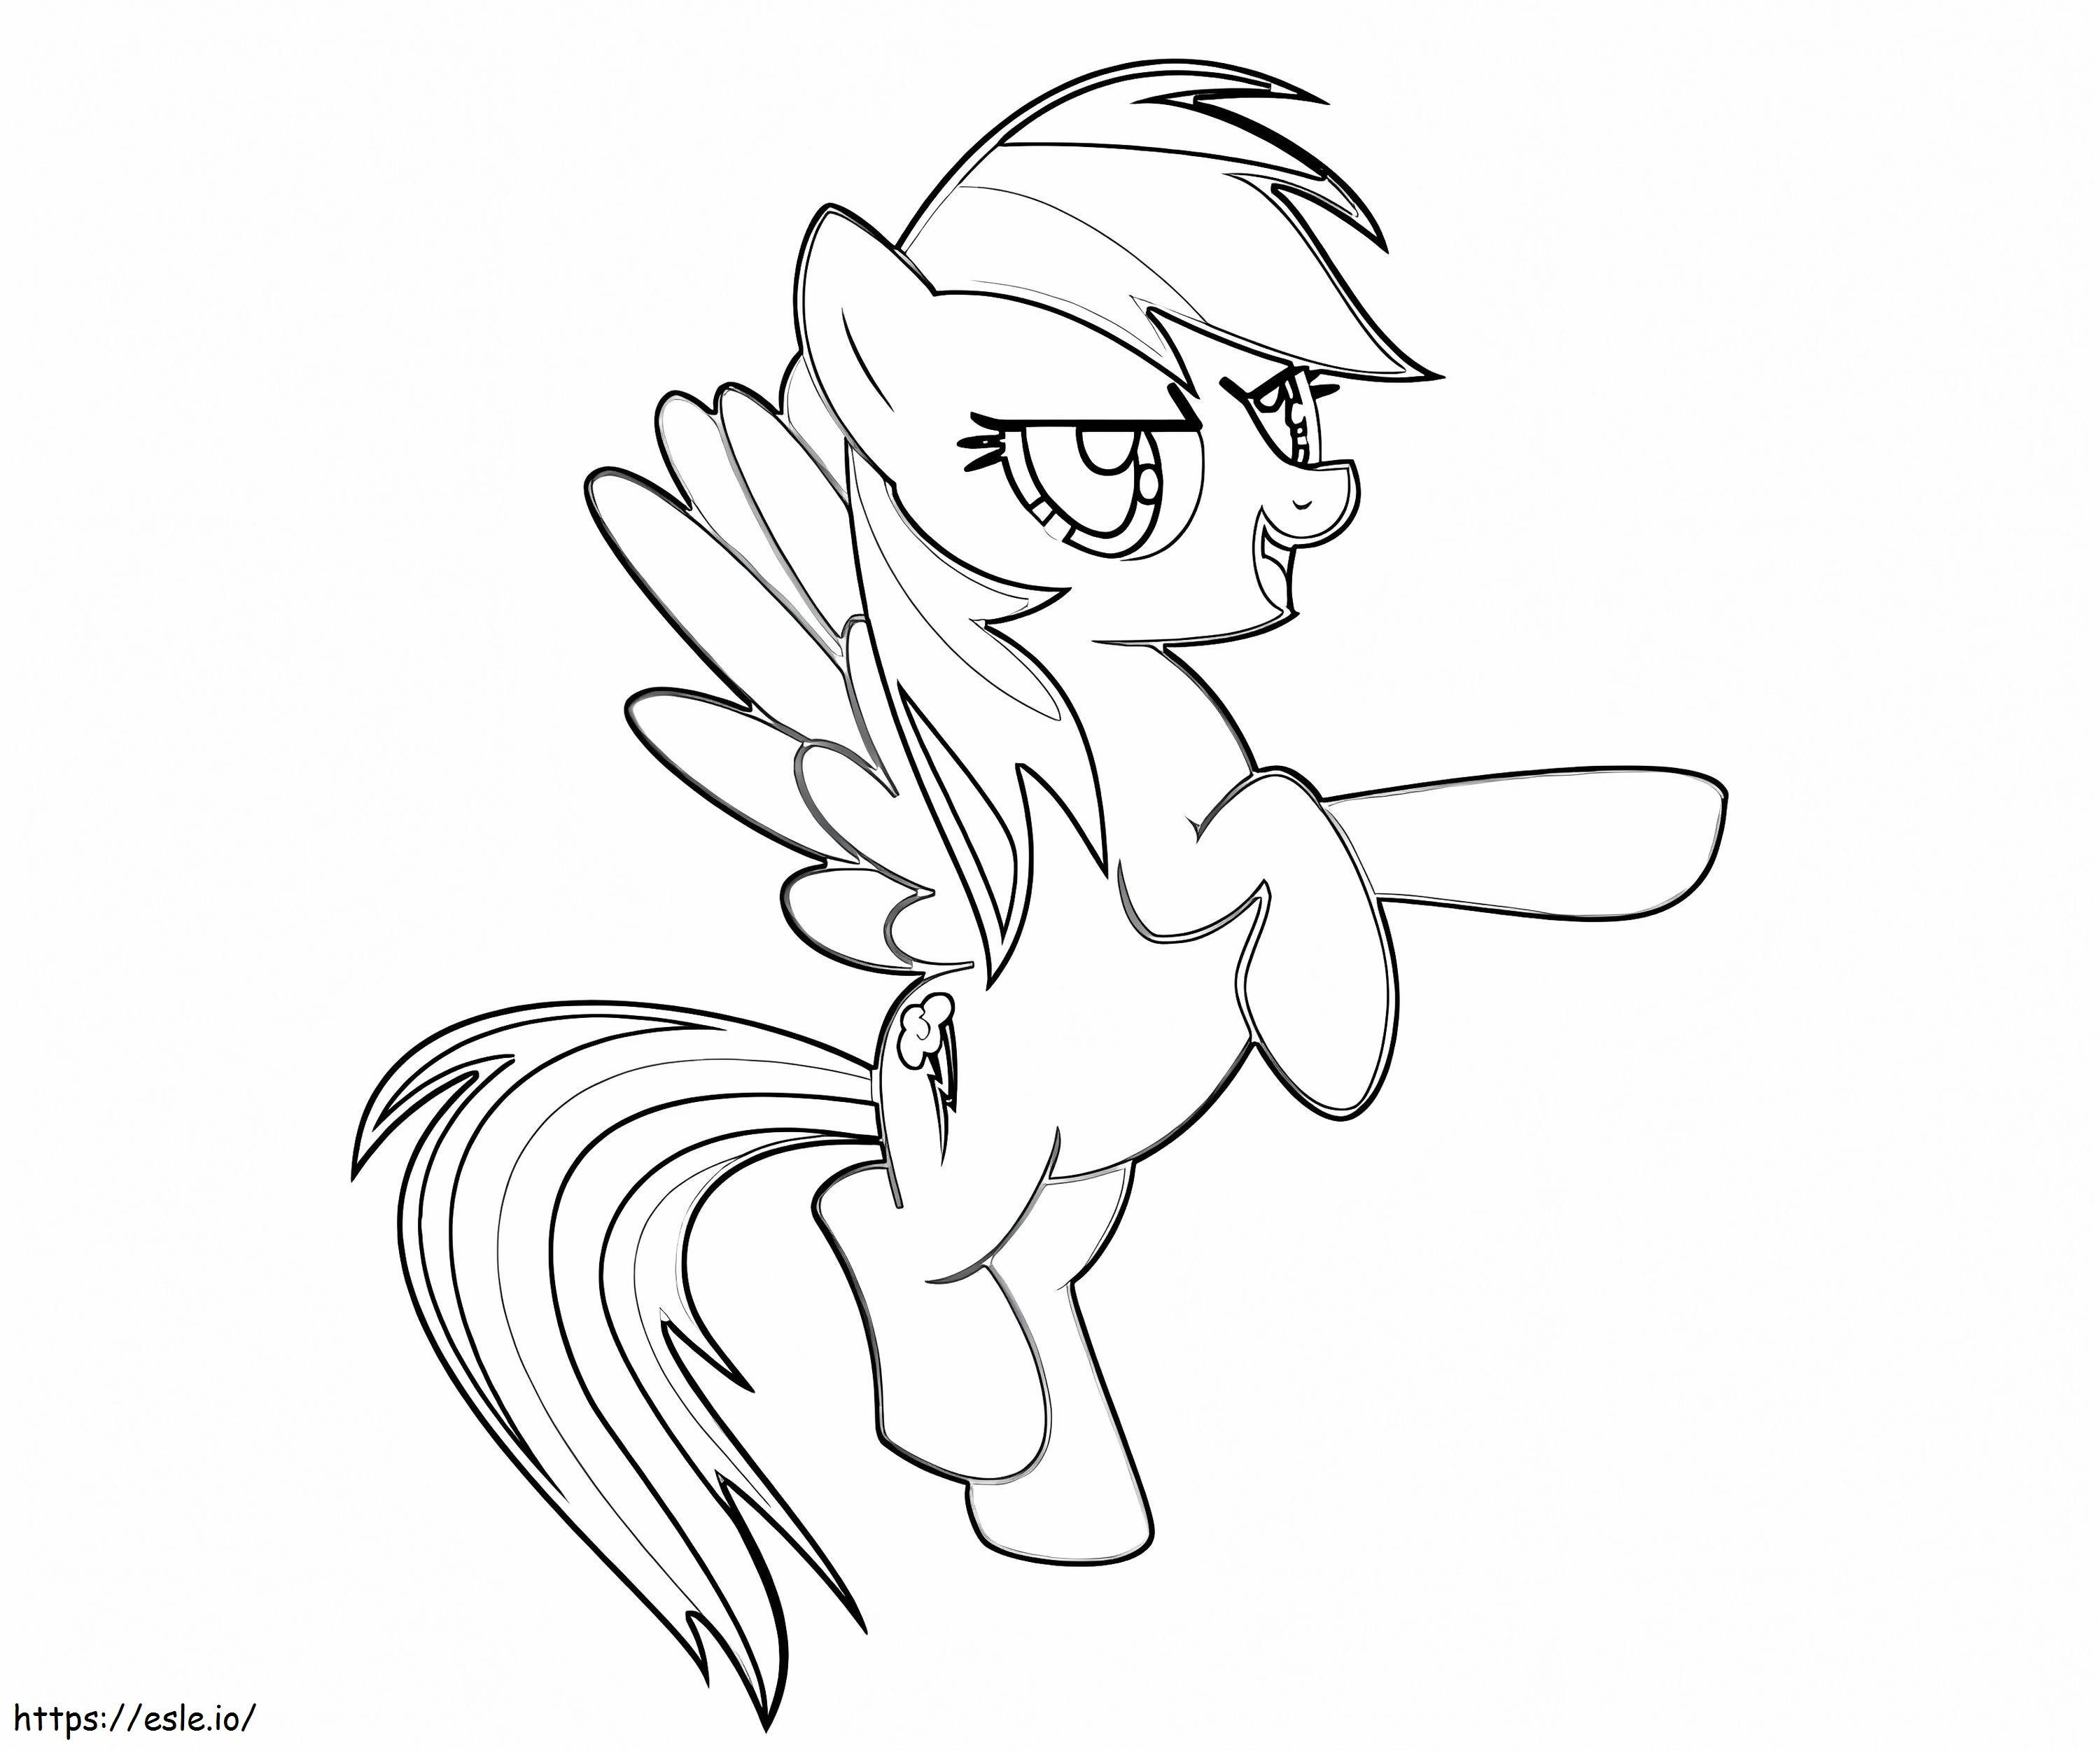 Cool Rainbow Dash coloring page